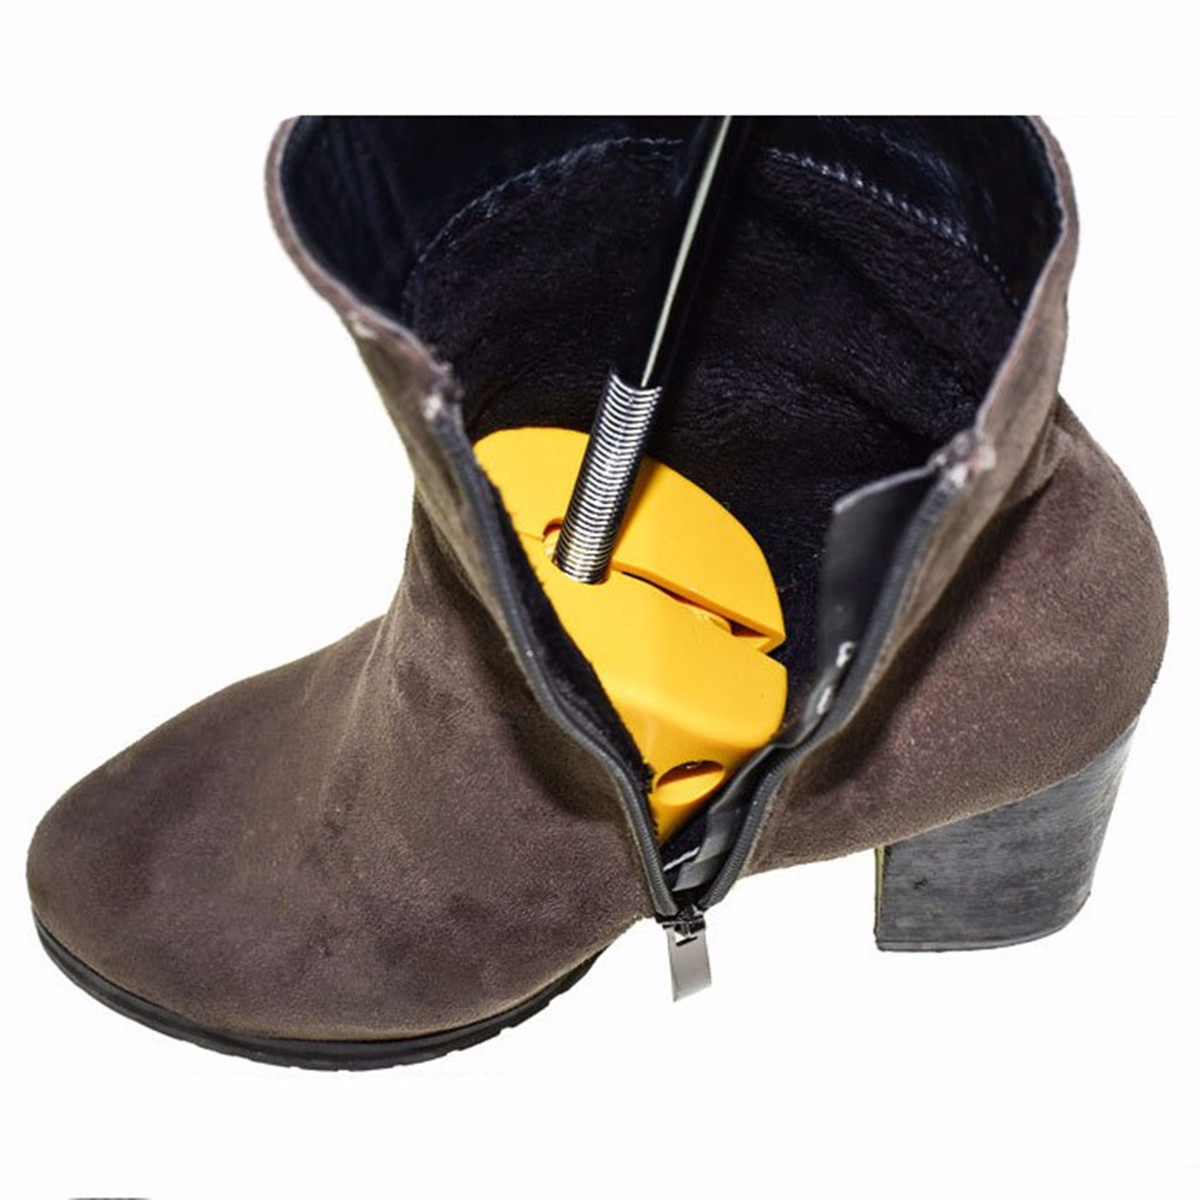 Professional-Boot-Stretcher-Adjustable-Width-Shoe-Shaper-Extender-Wooden-Boot-Tree-Stretch-for-Women-1382436